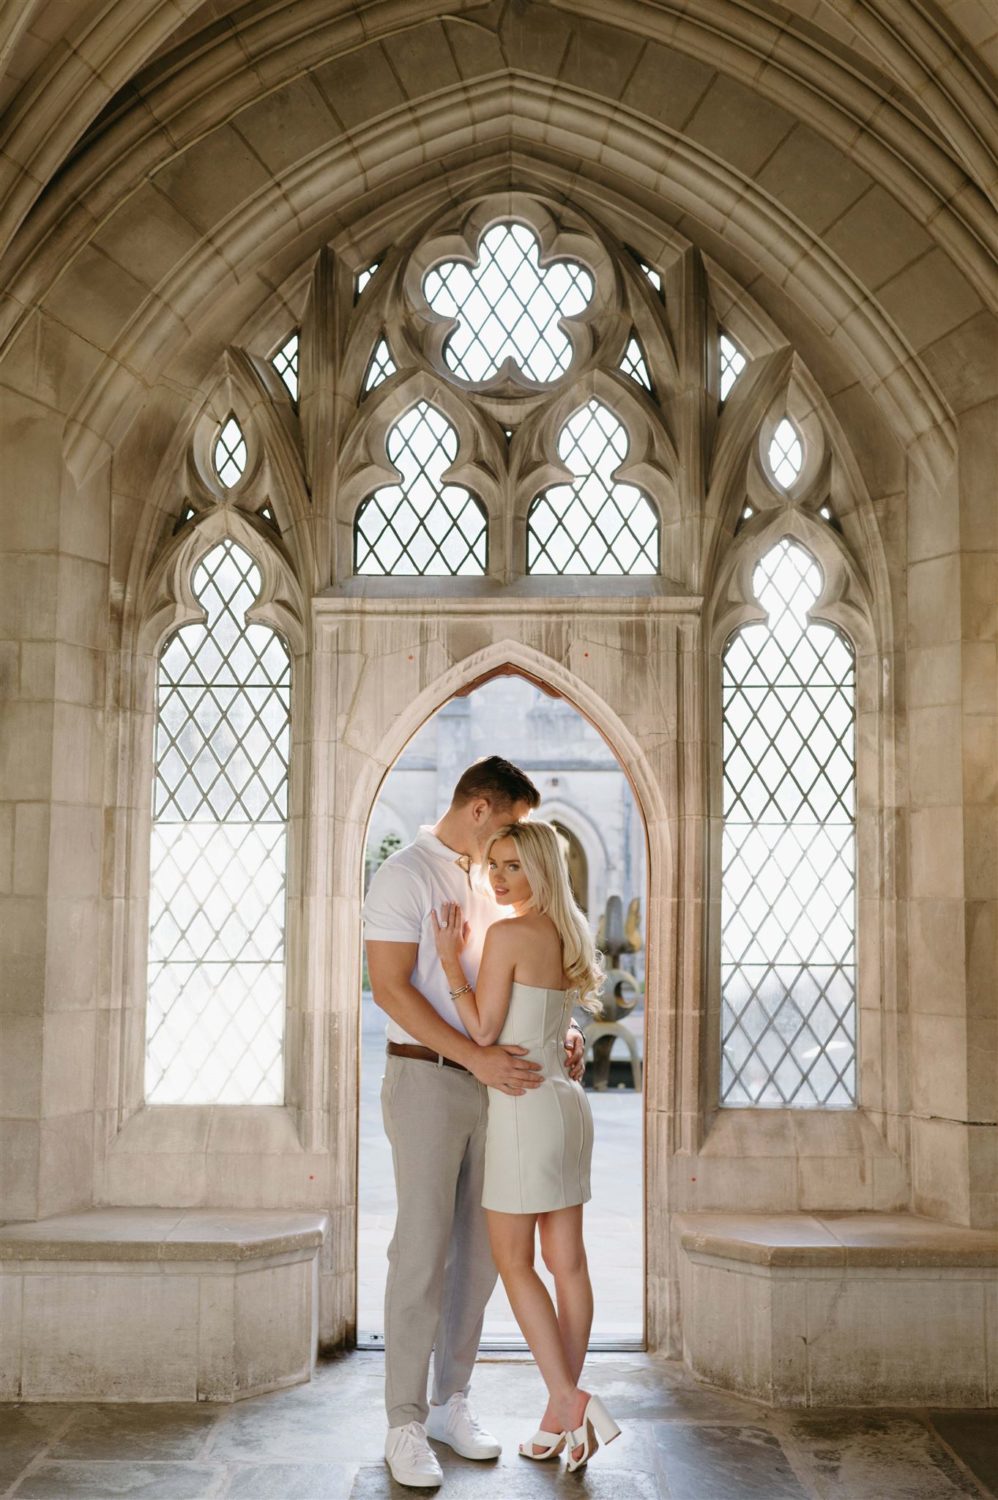 national cathedral engagement photos couple archway